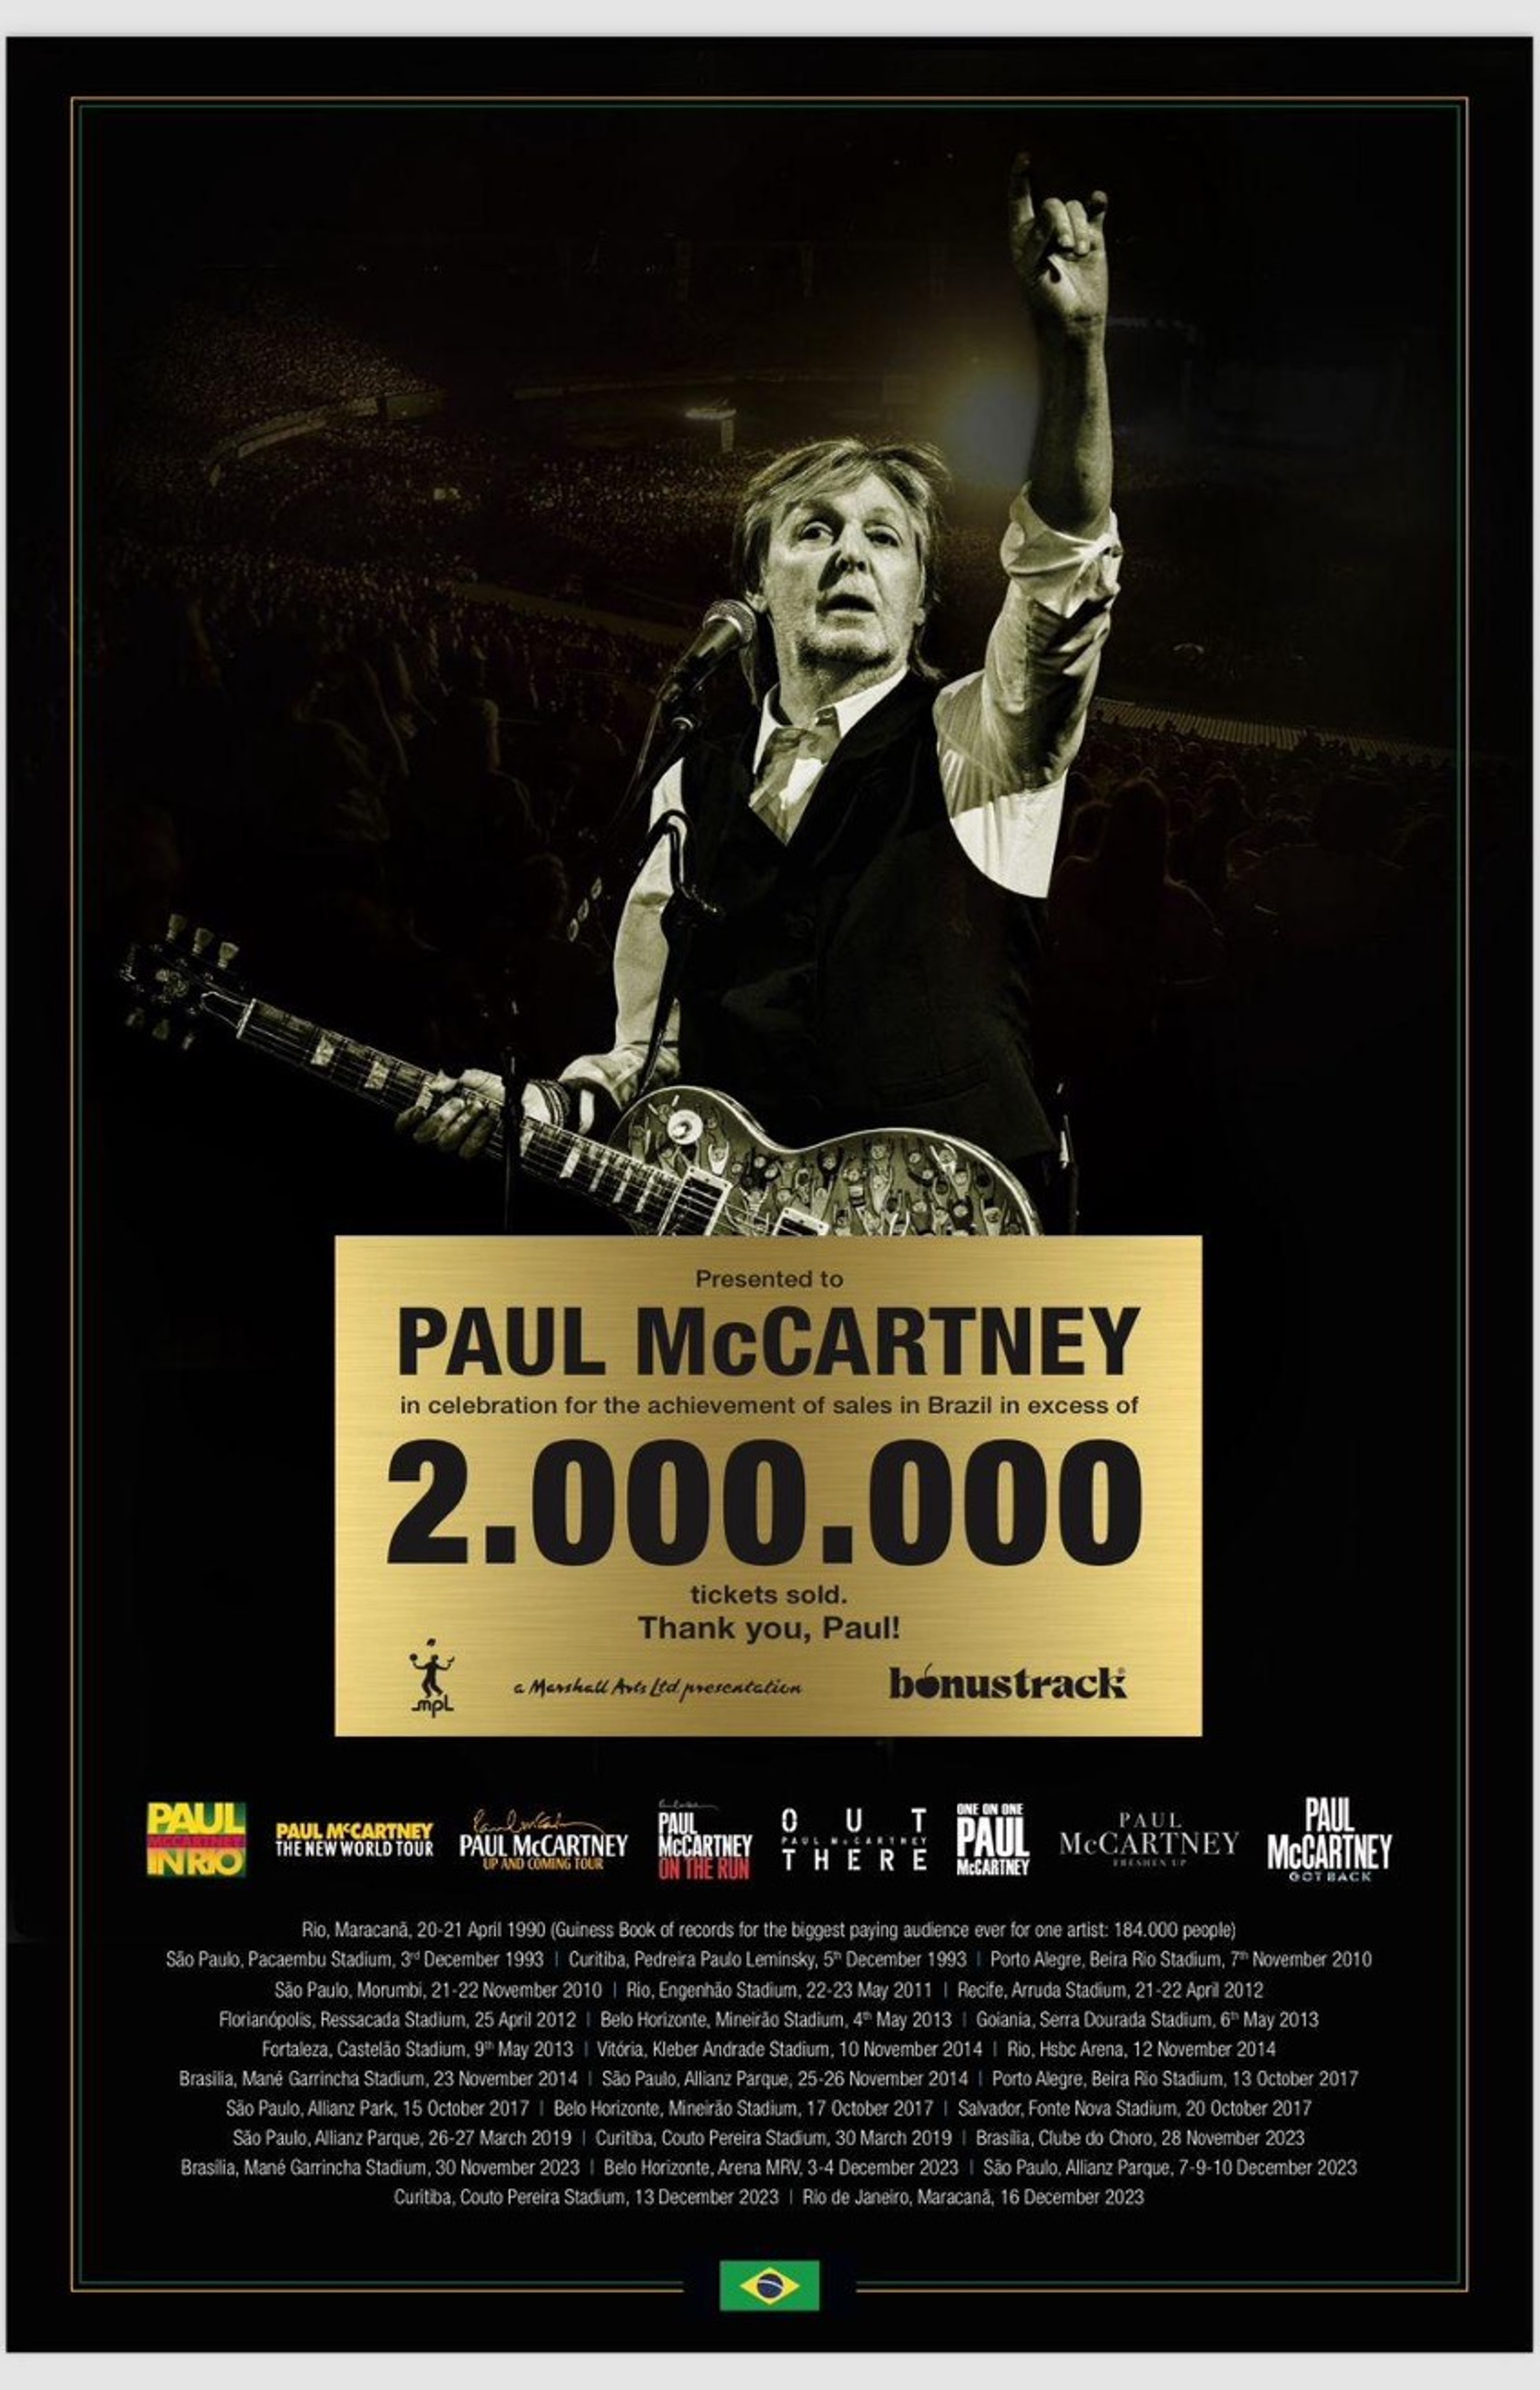 Poster congratulating Paul on selling over 2 million tickets in Brazil